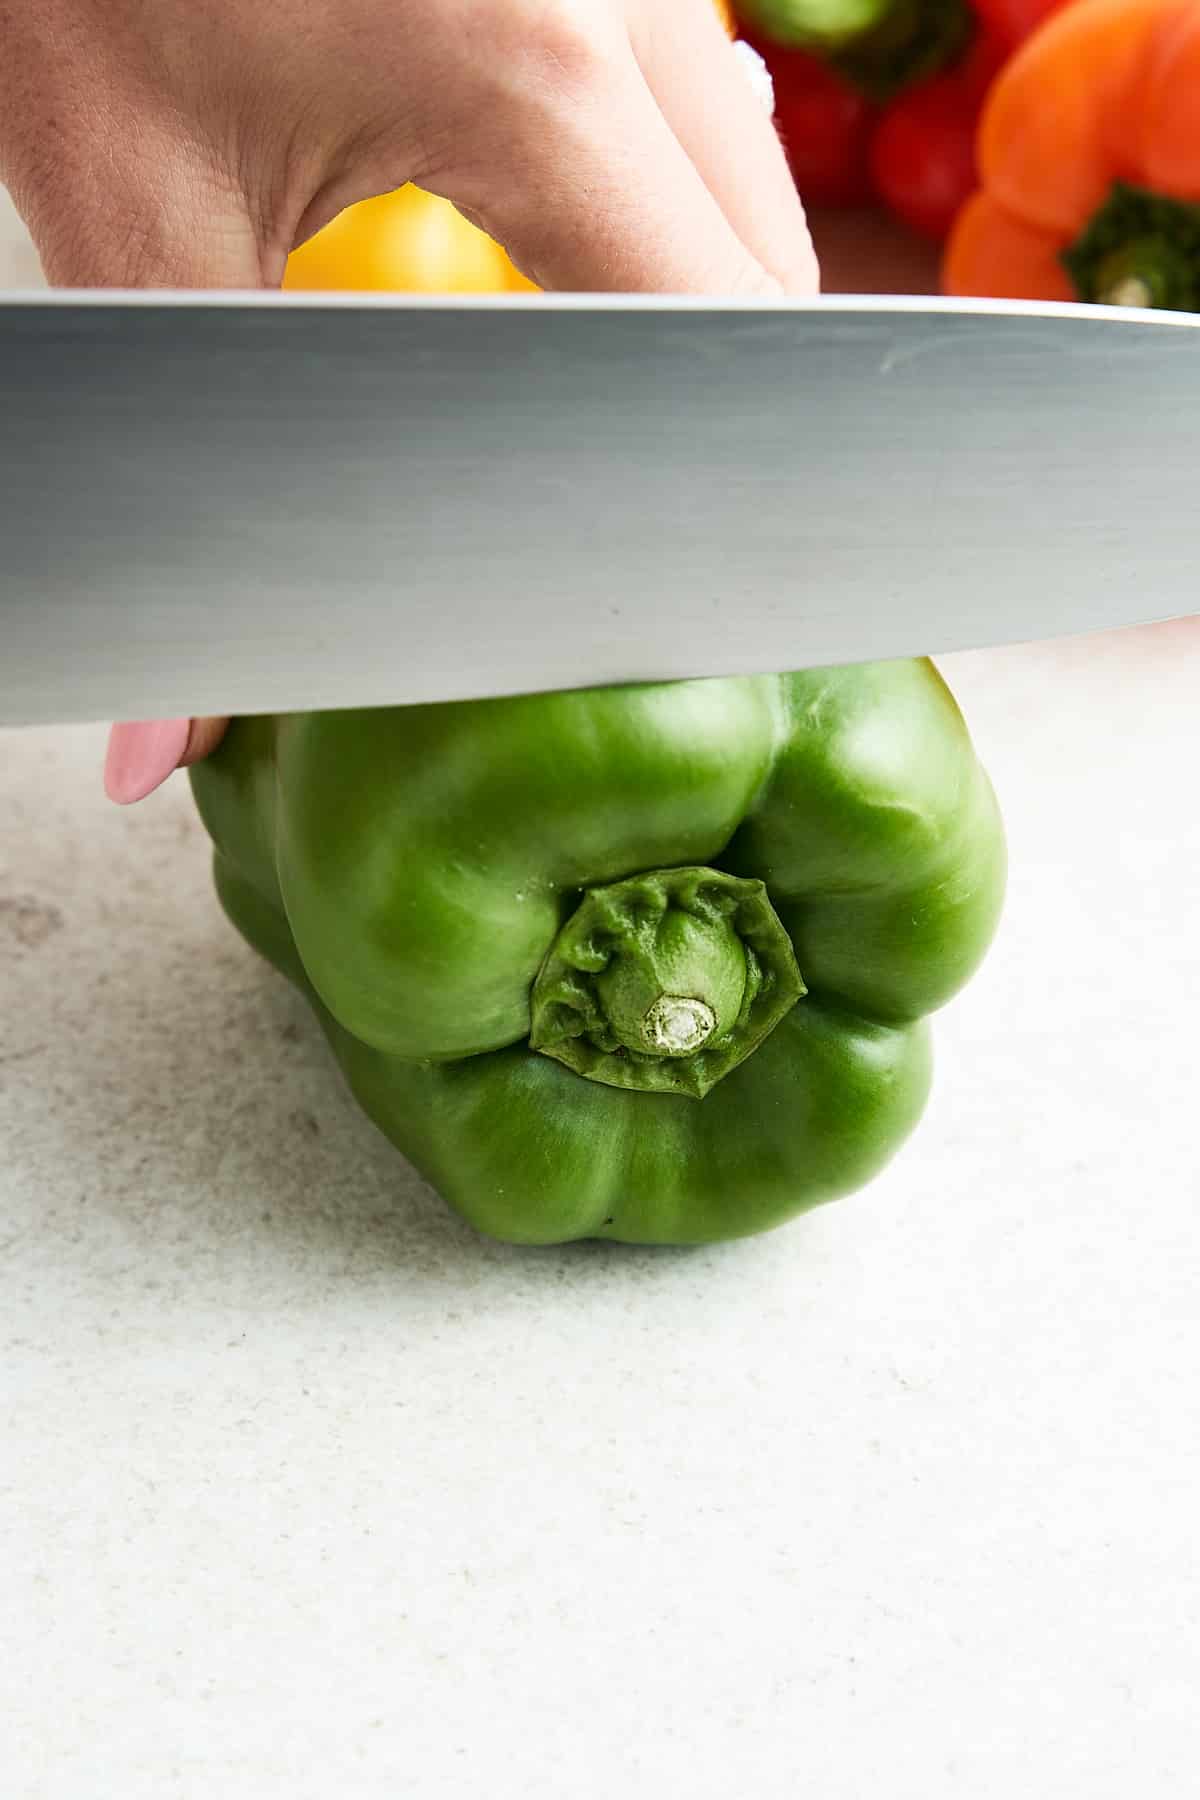 Trimming the top off a bell pepper.